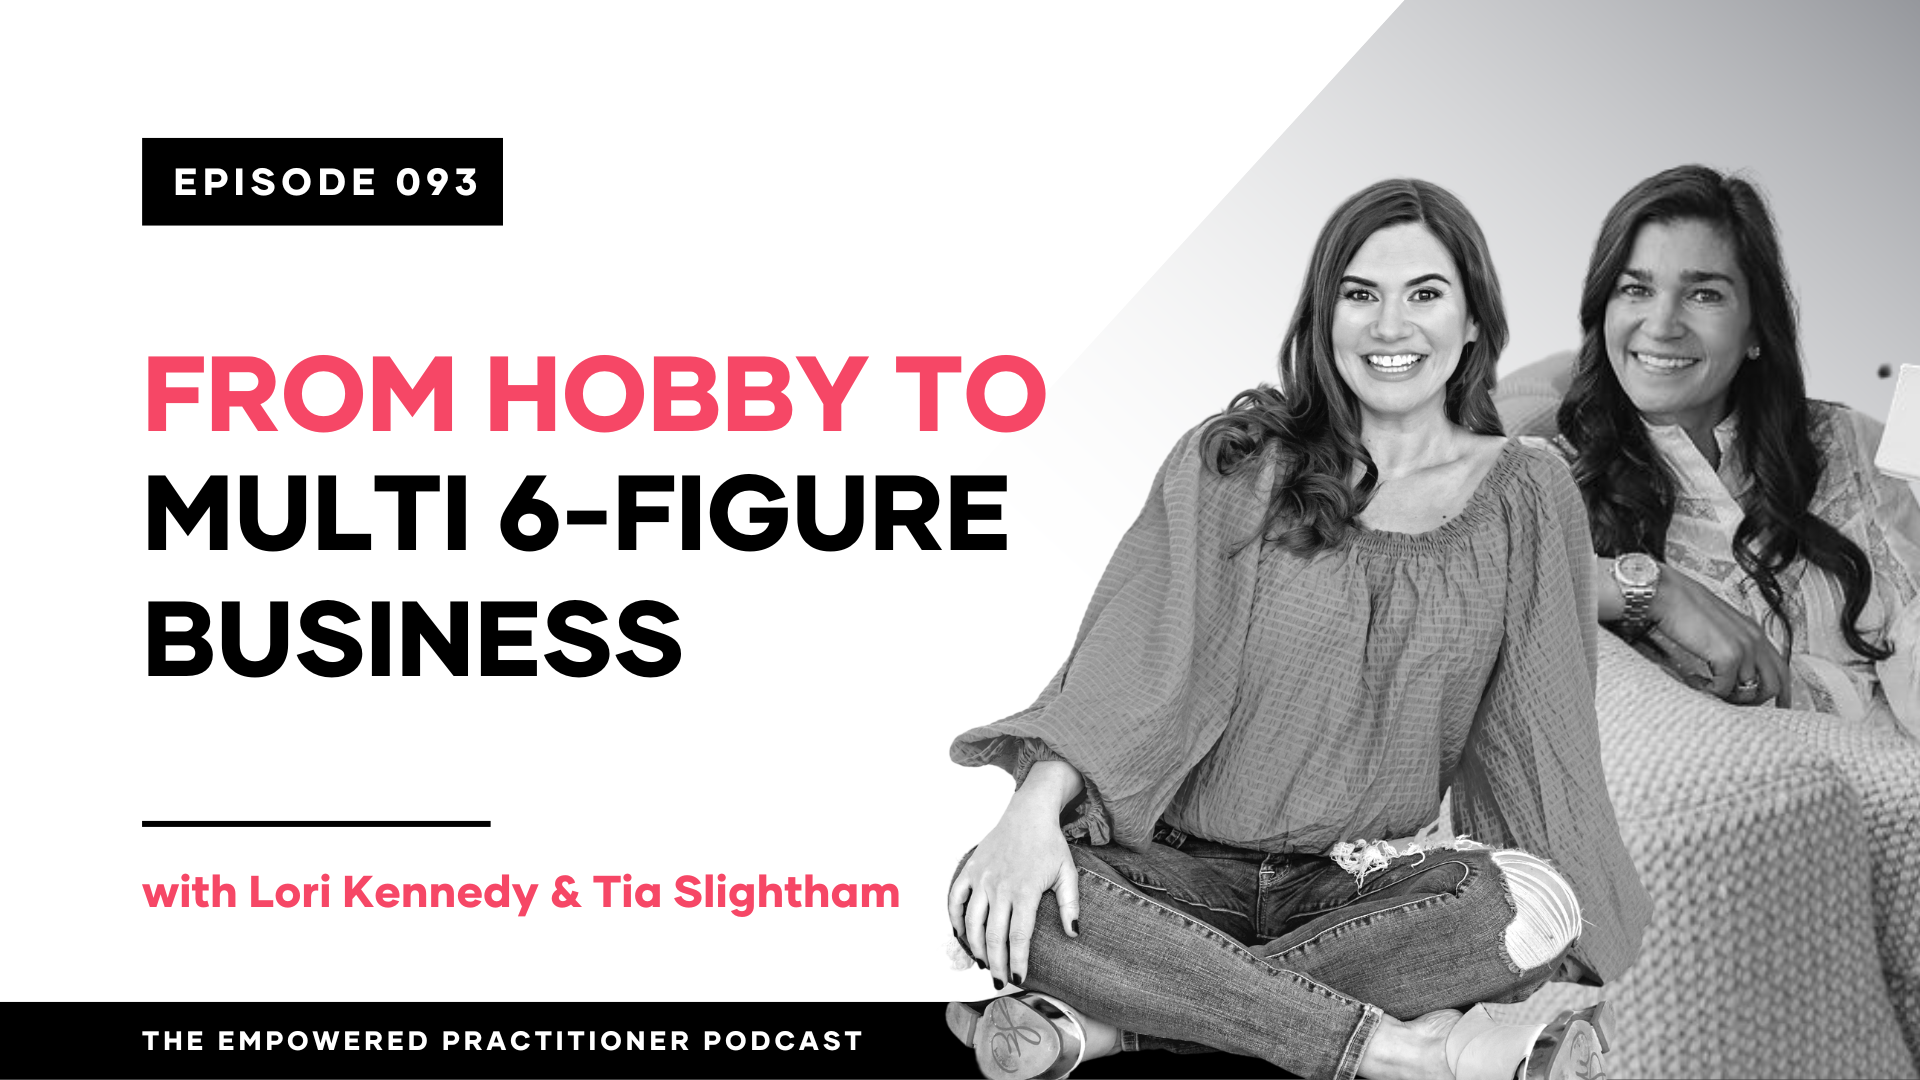 From Hobby To Multi 6-Figure Business